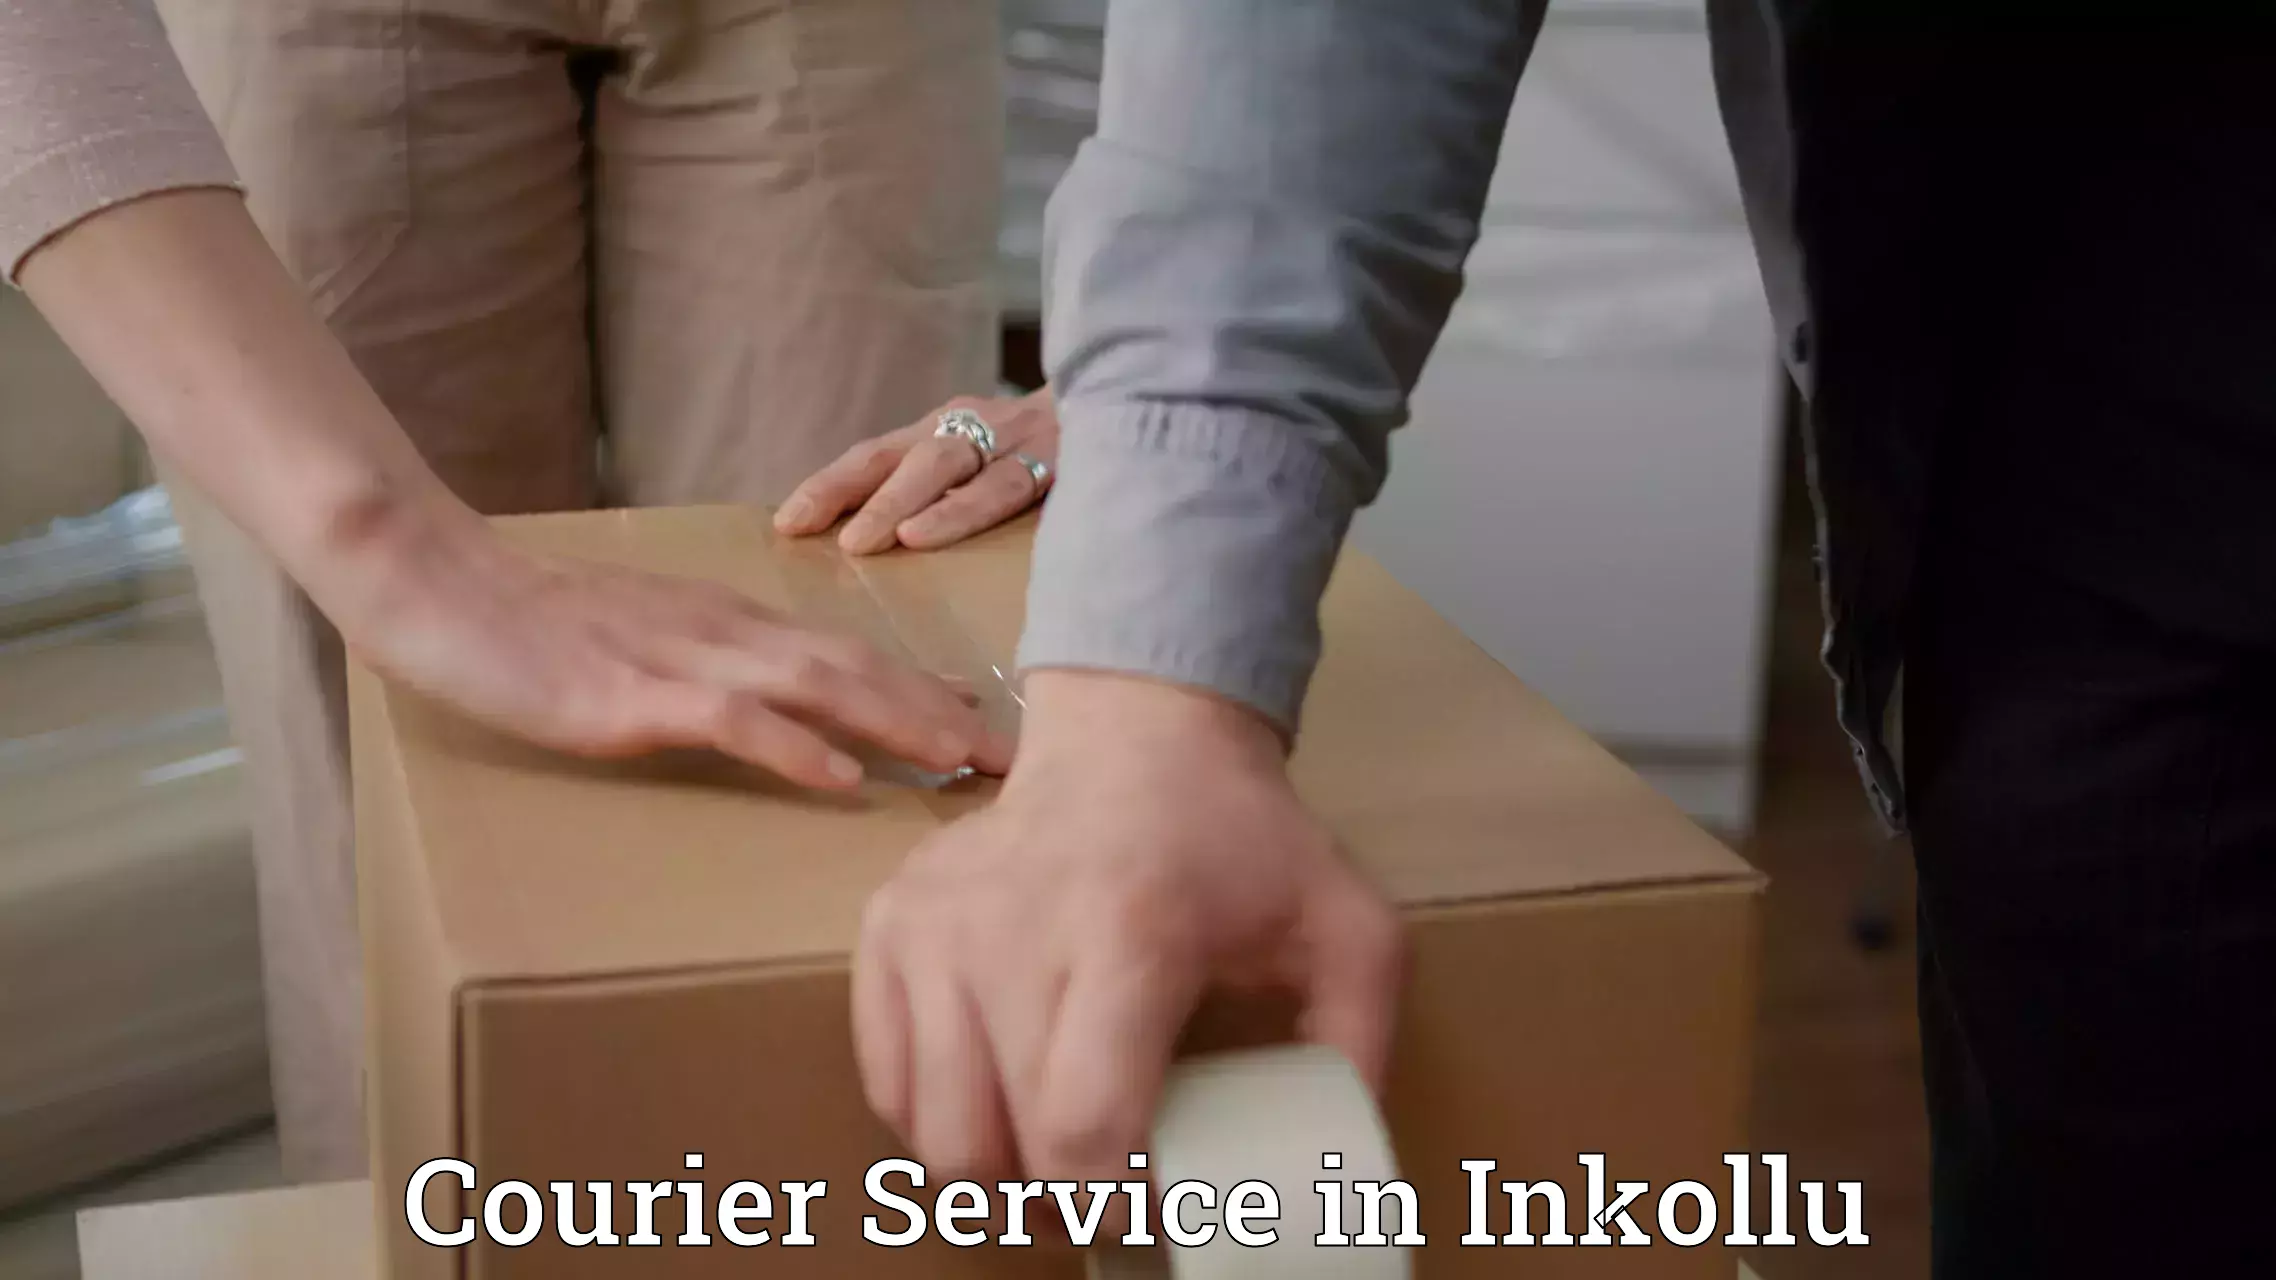 On-demand delivery in Inkollu